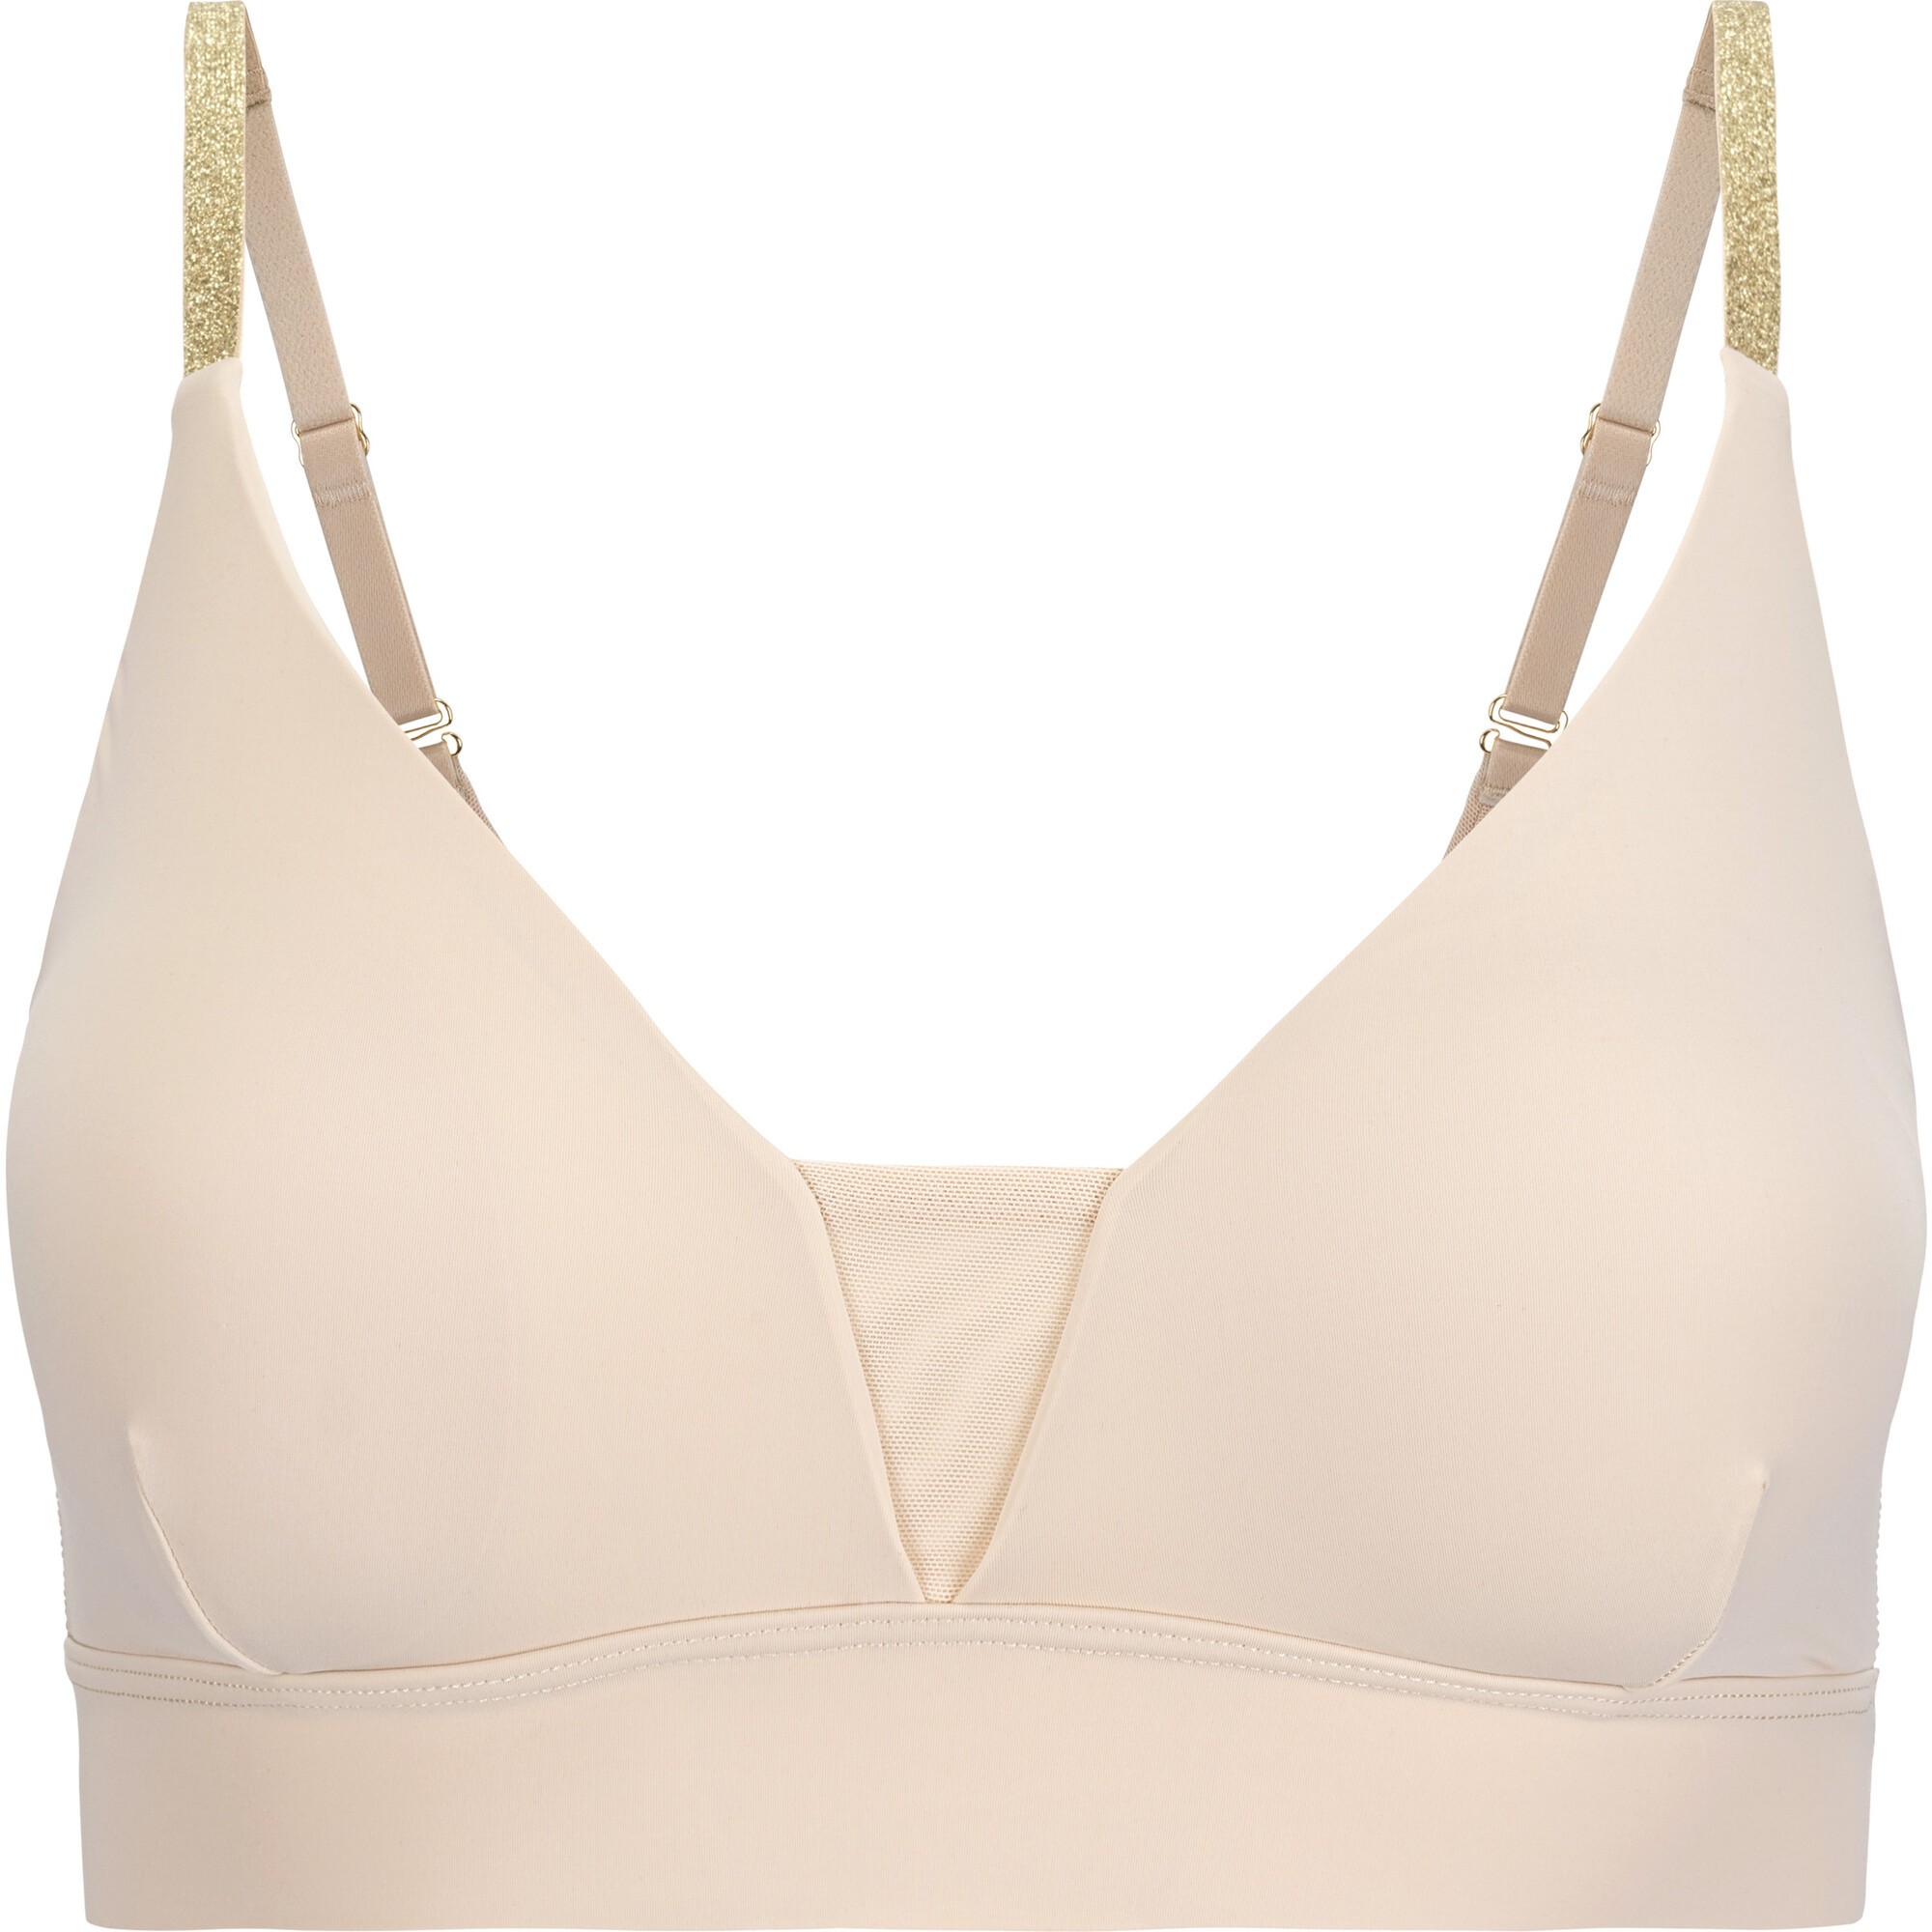 WHAT IS A SOFT BRA? (AND WHY YOU NEED ONE) – Uwila Warrior